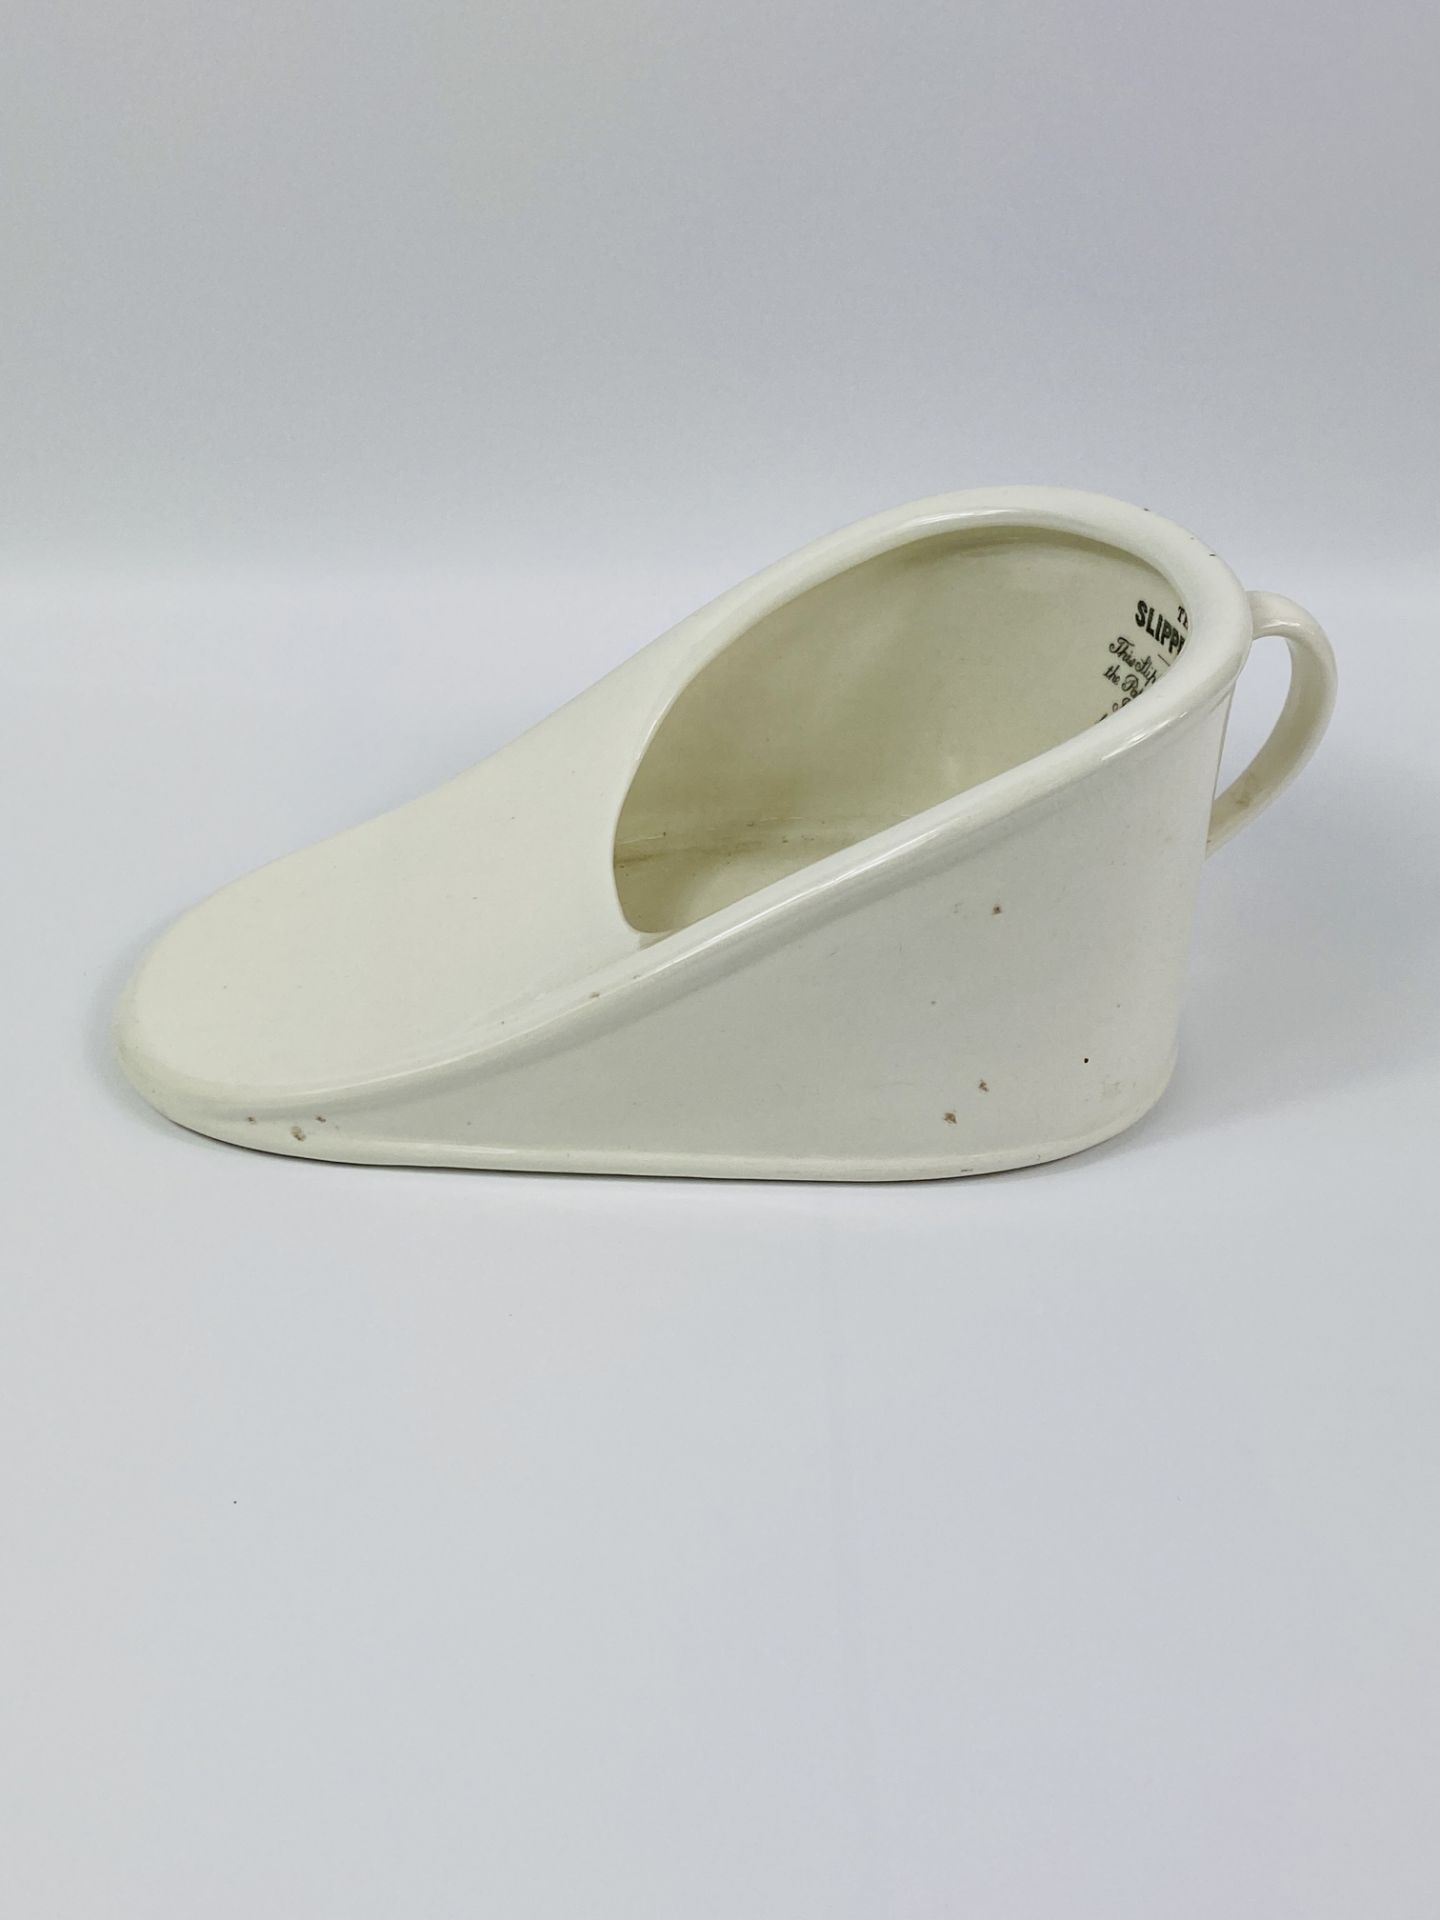 Slipper bedpan and a ceramic bed bottle - Image 3 of 6